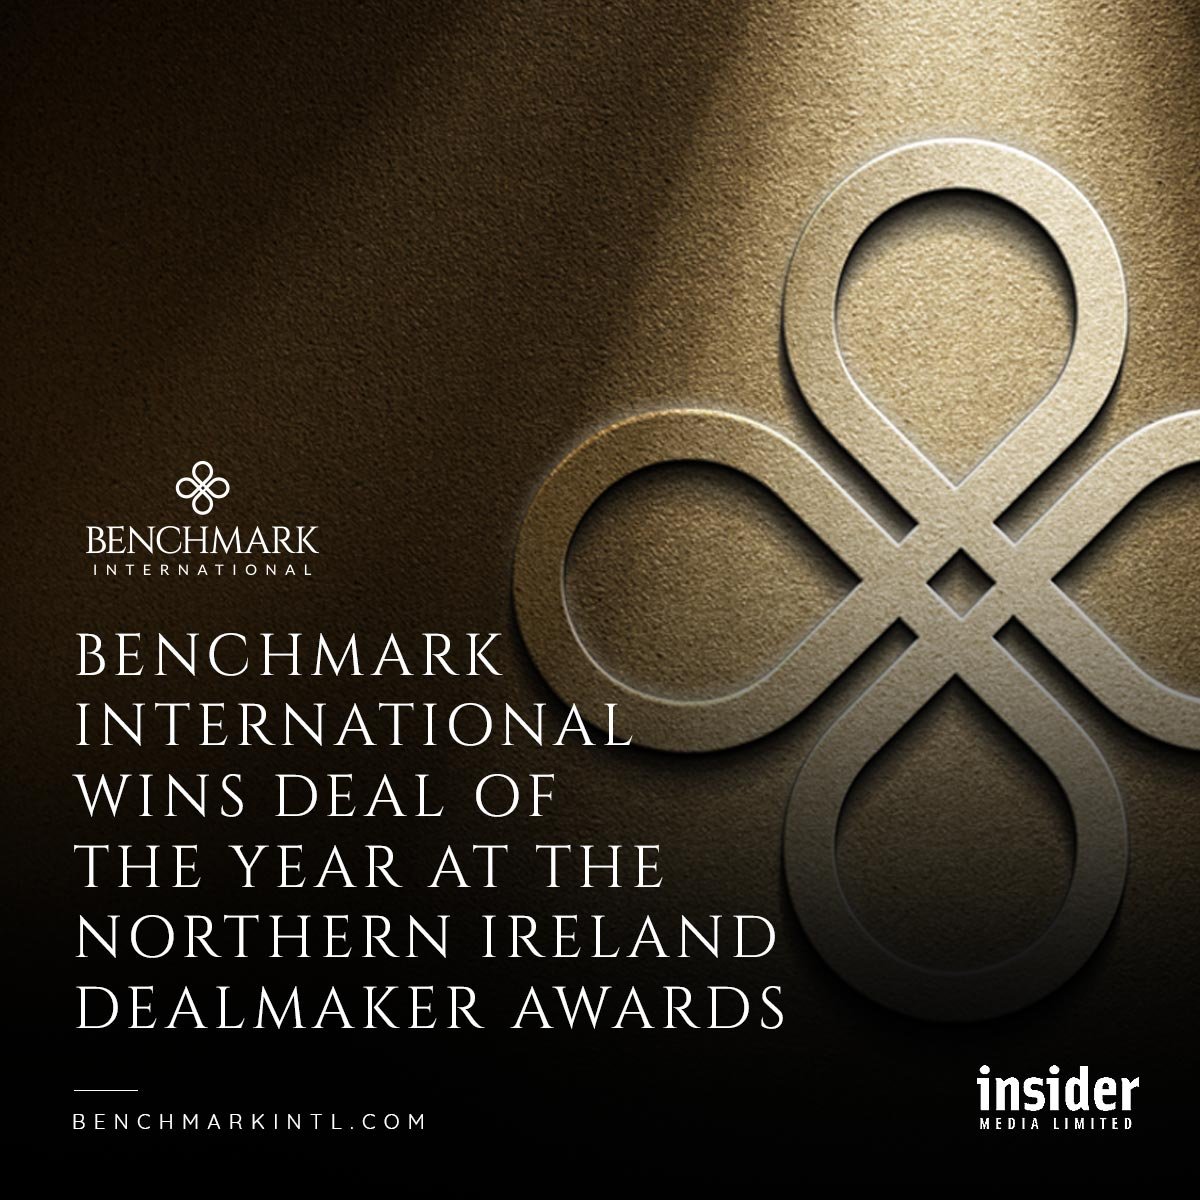 Benchmark International Wins Deal of the Year